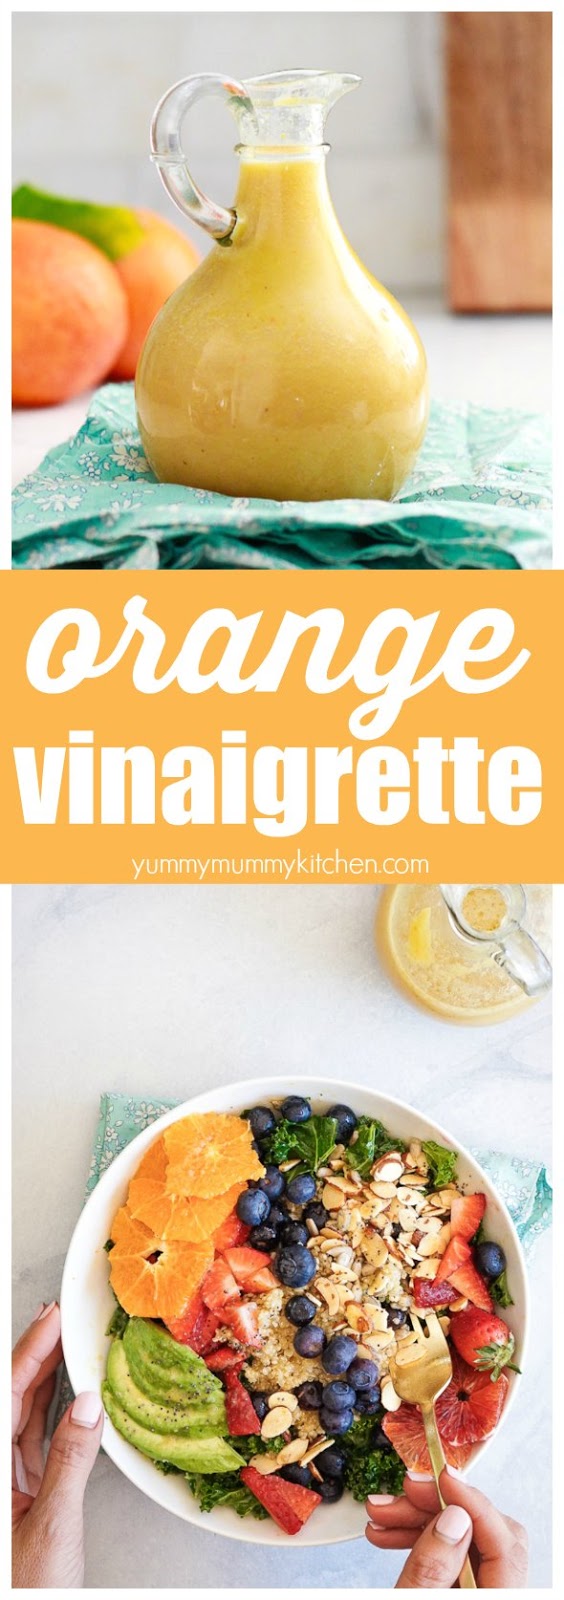 This easy orange citrus vinaigrette is made in the blender and is so delicious on green salads like this superfood kale salad with berries and quinoa. This is one of my favorite vegan, vegetarian, gluten-free lunch ideas! 